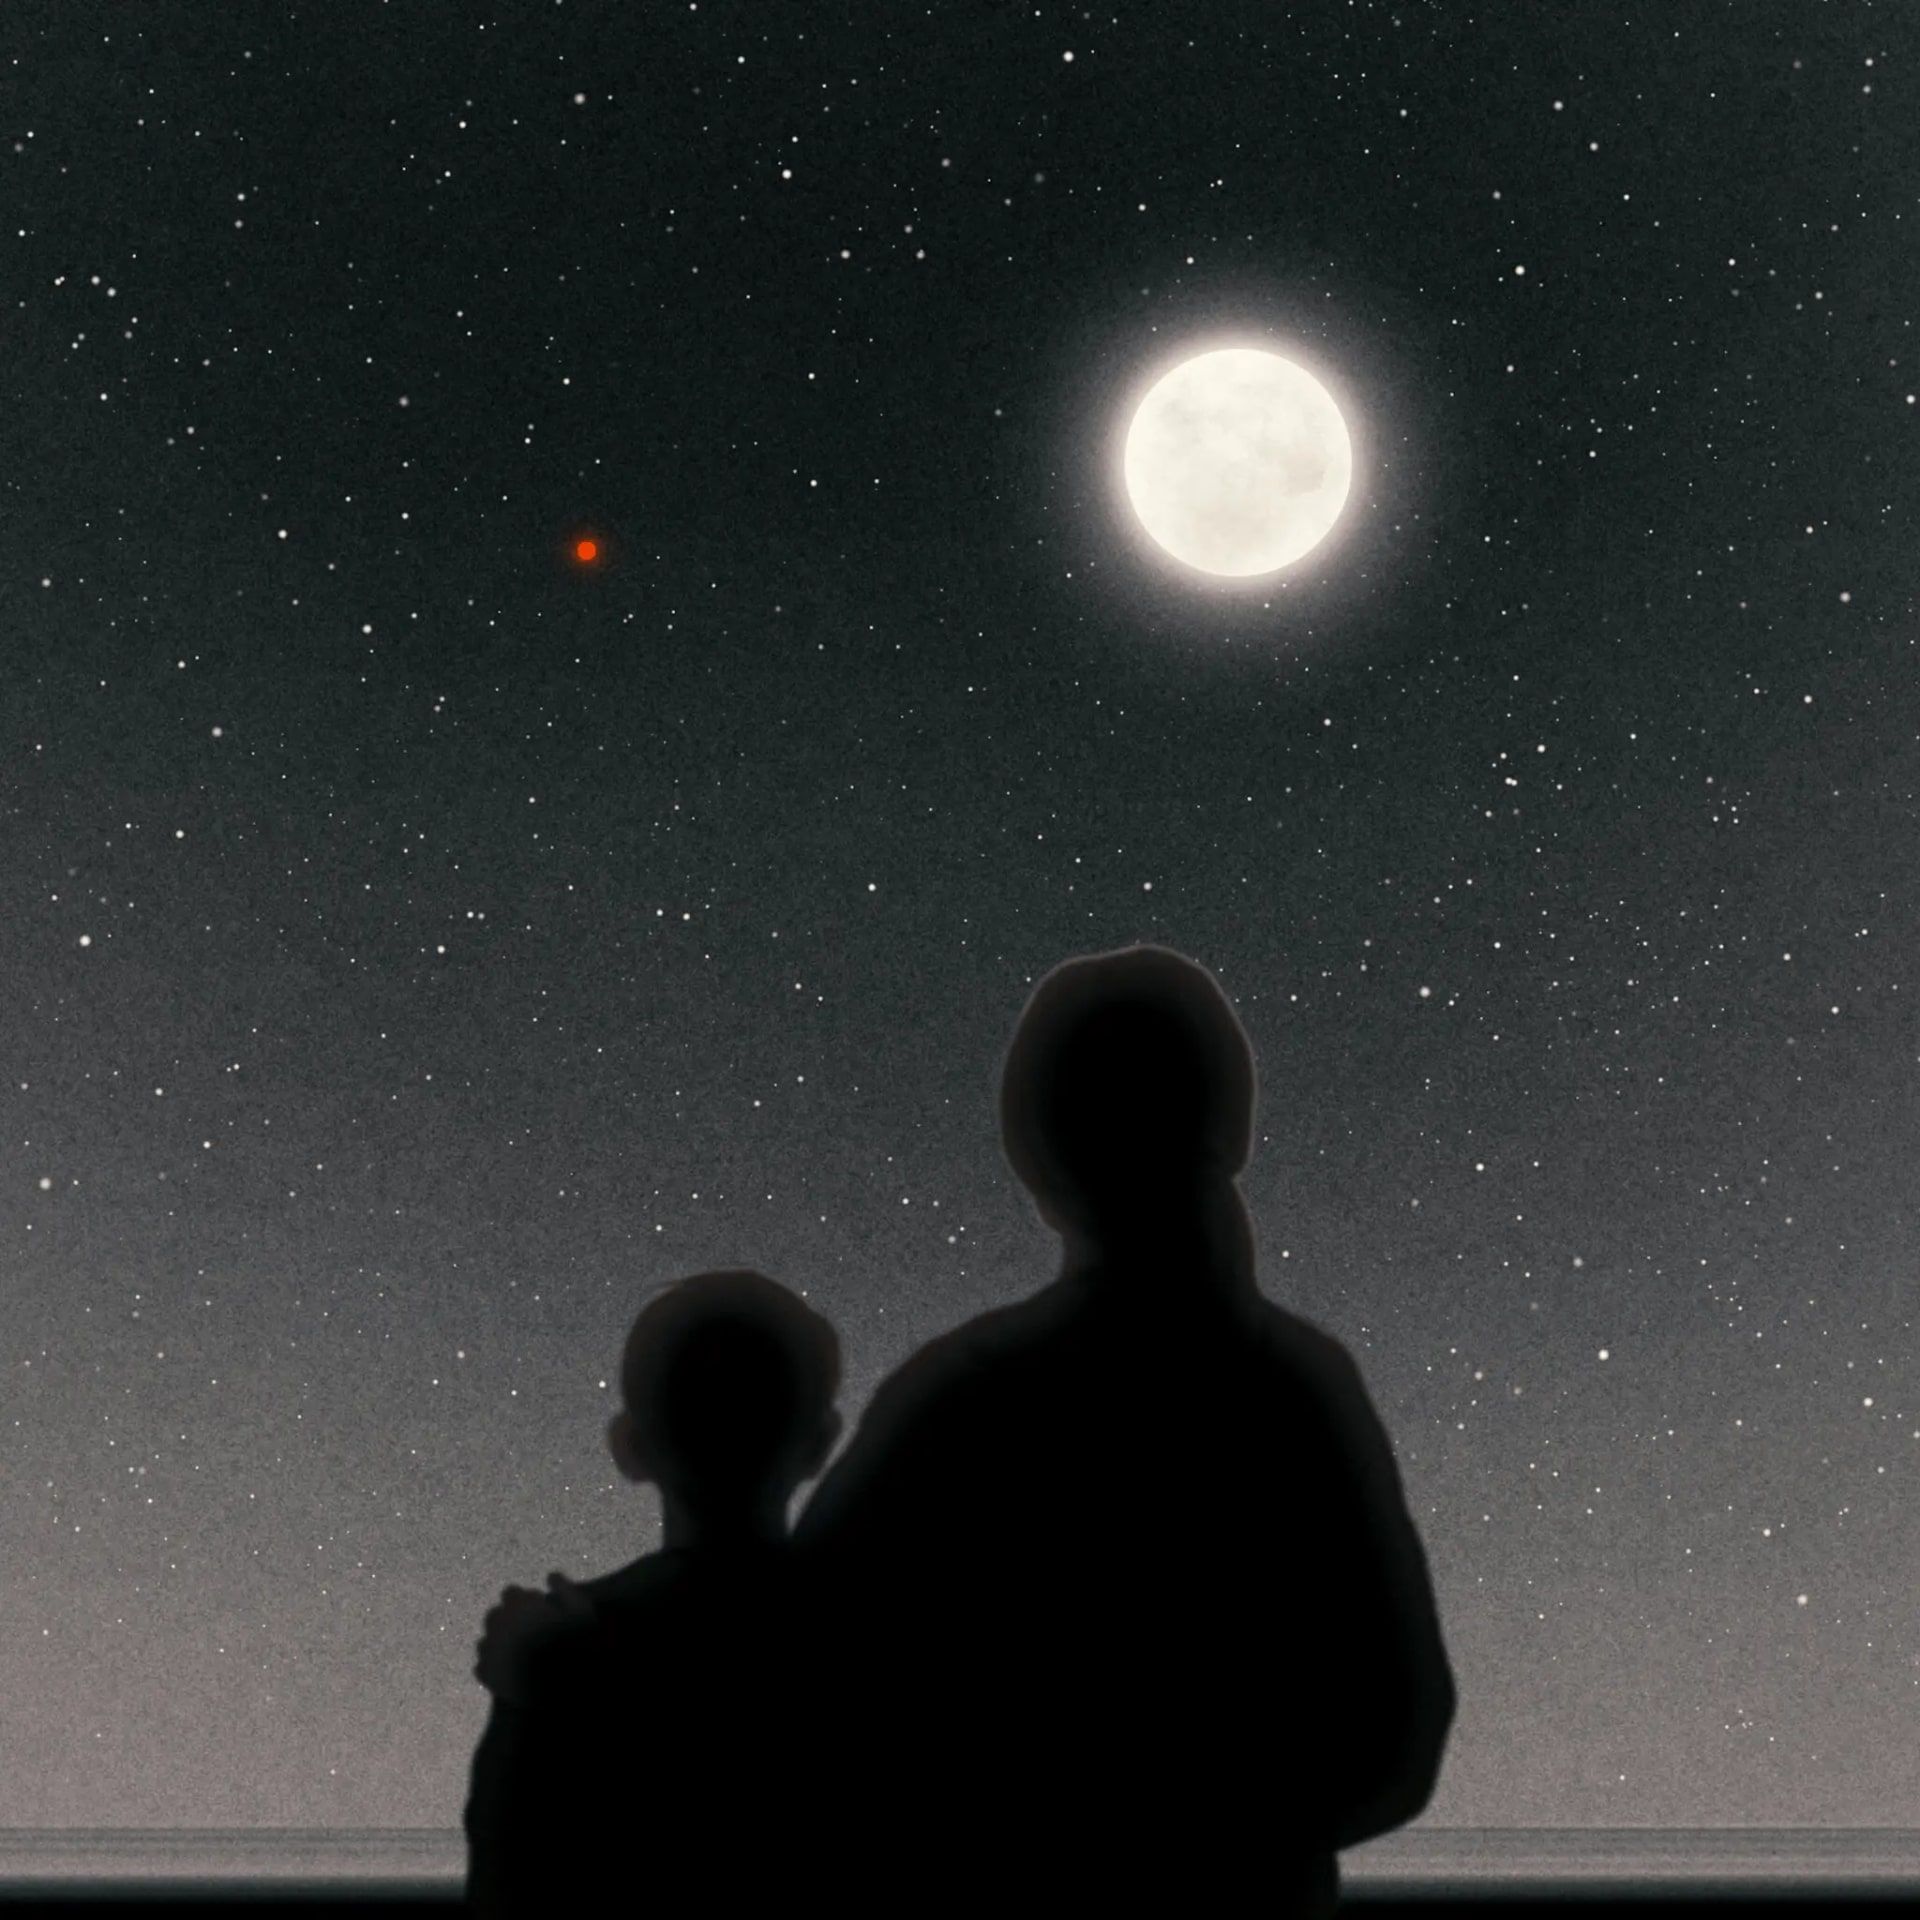 Mother and child watching the moon and Mars in the night sky